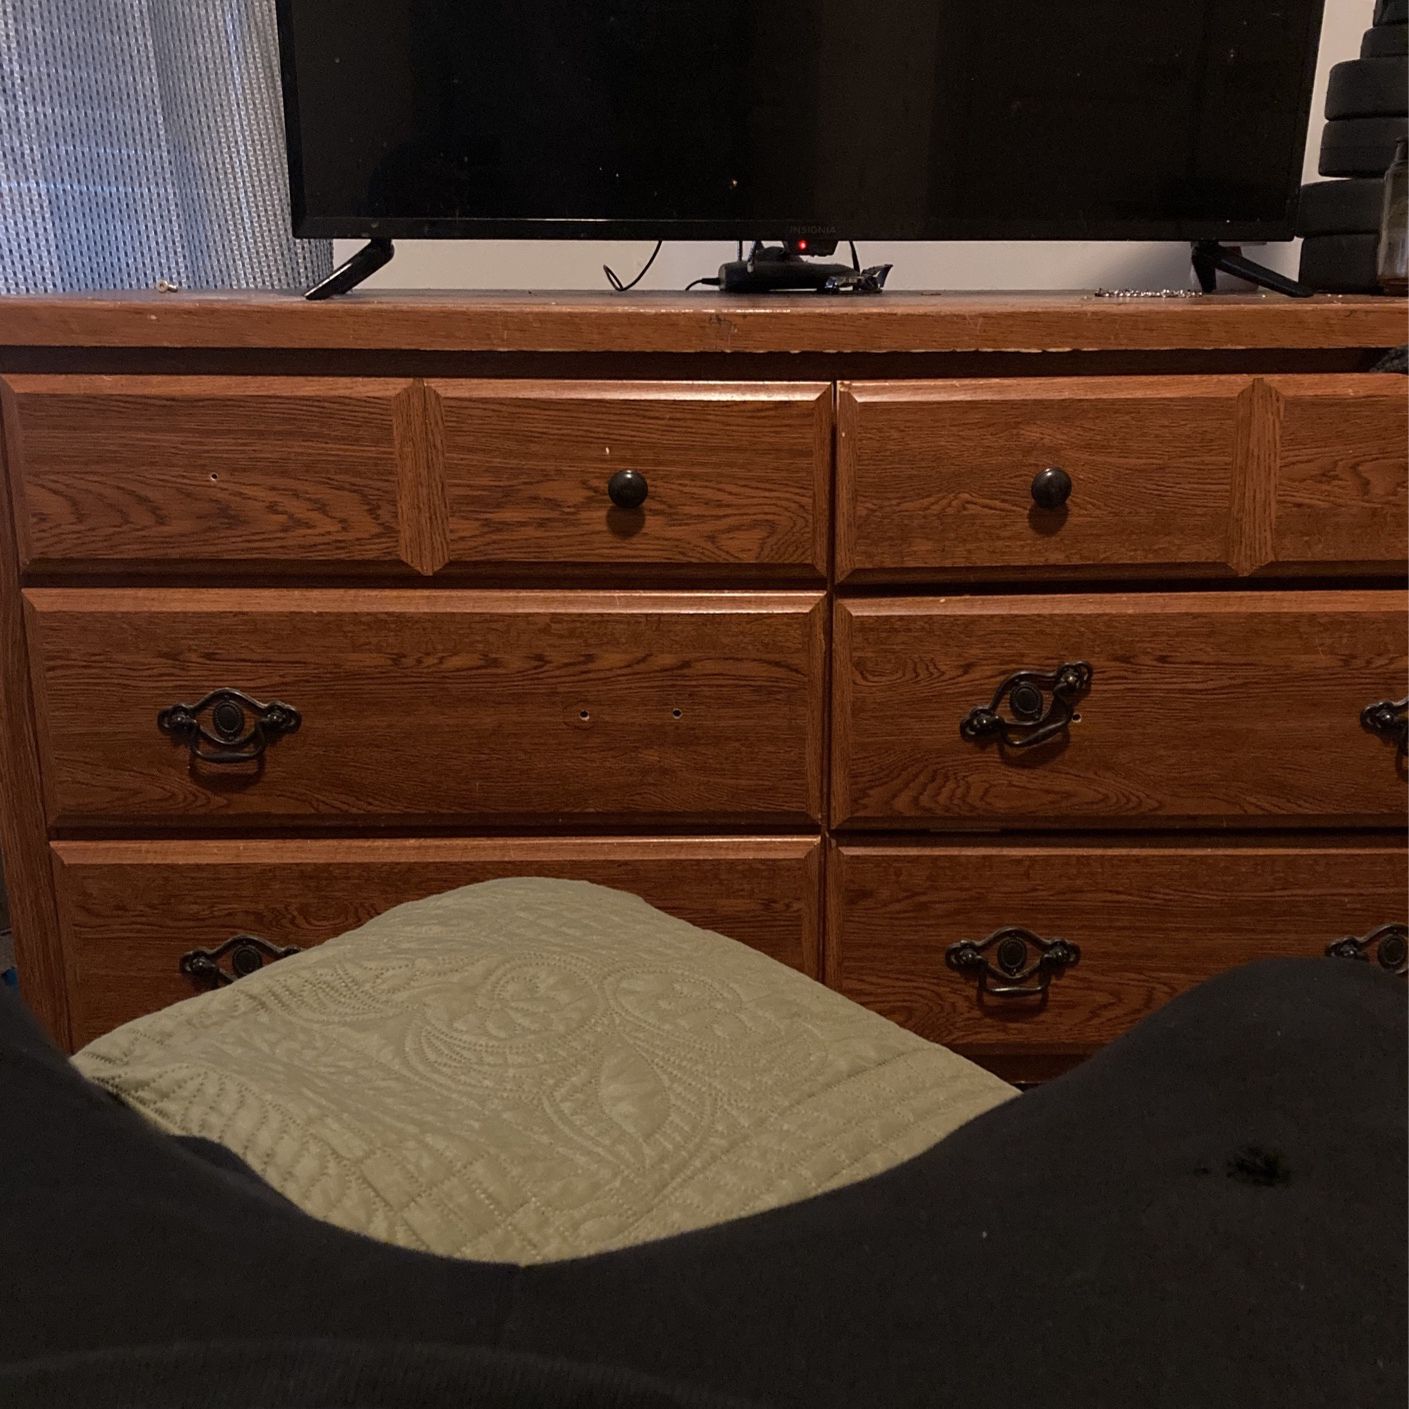 Television With A Firestick And A Dresser